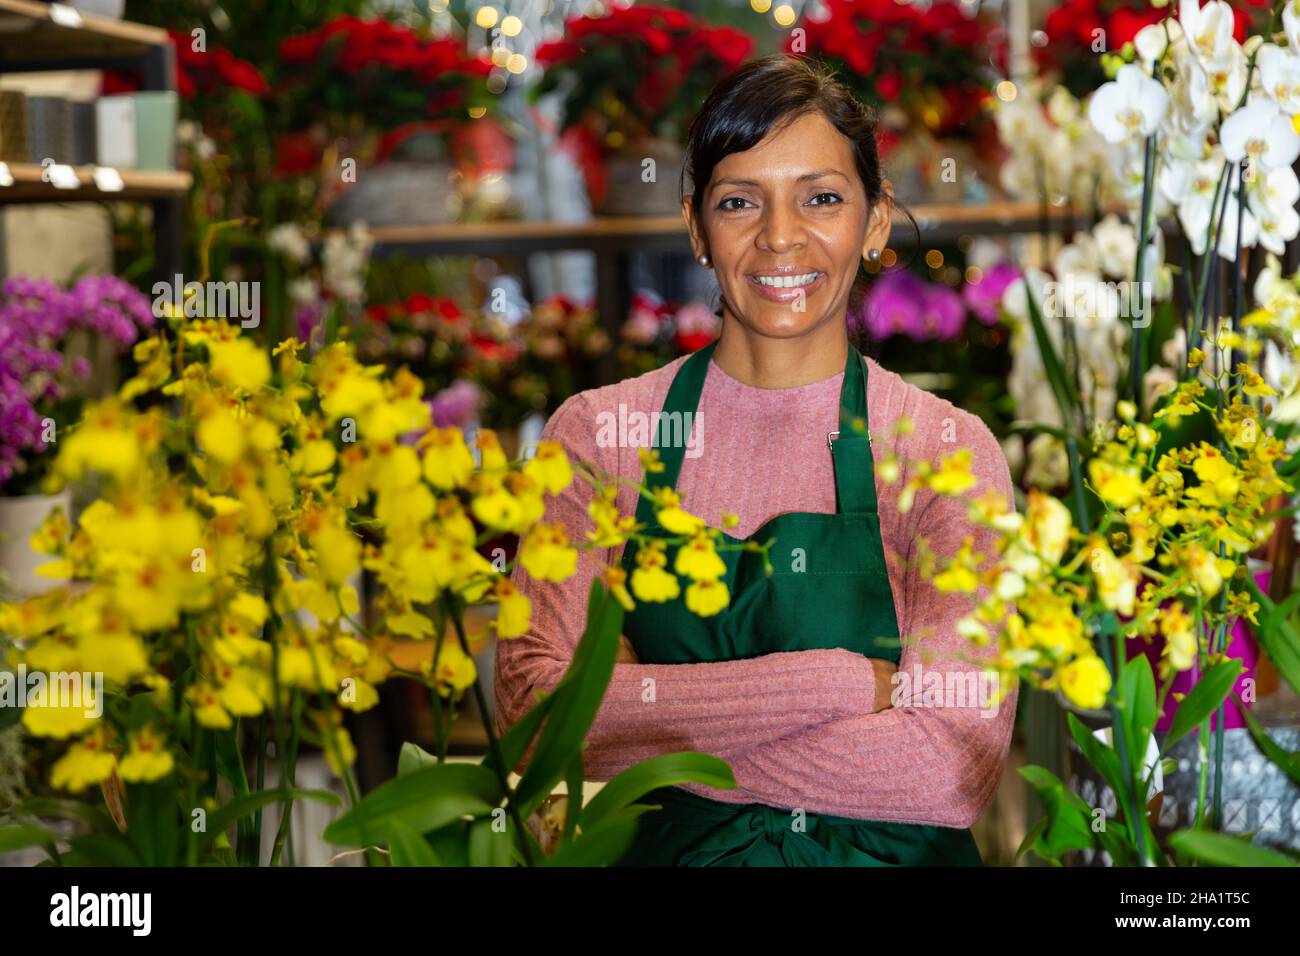 Woman seller posing with orchids in pots Stock Photo